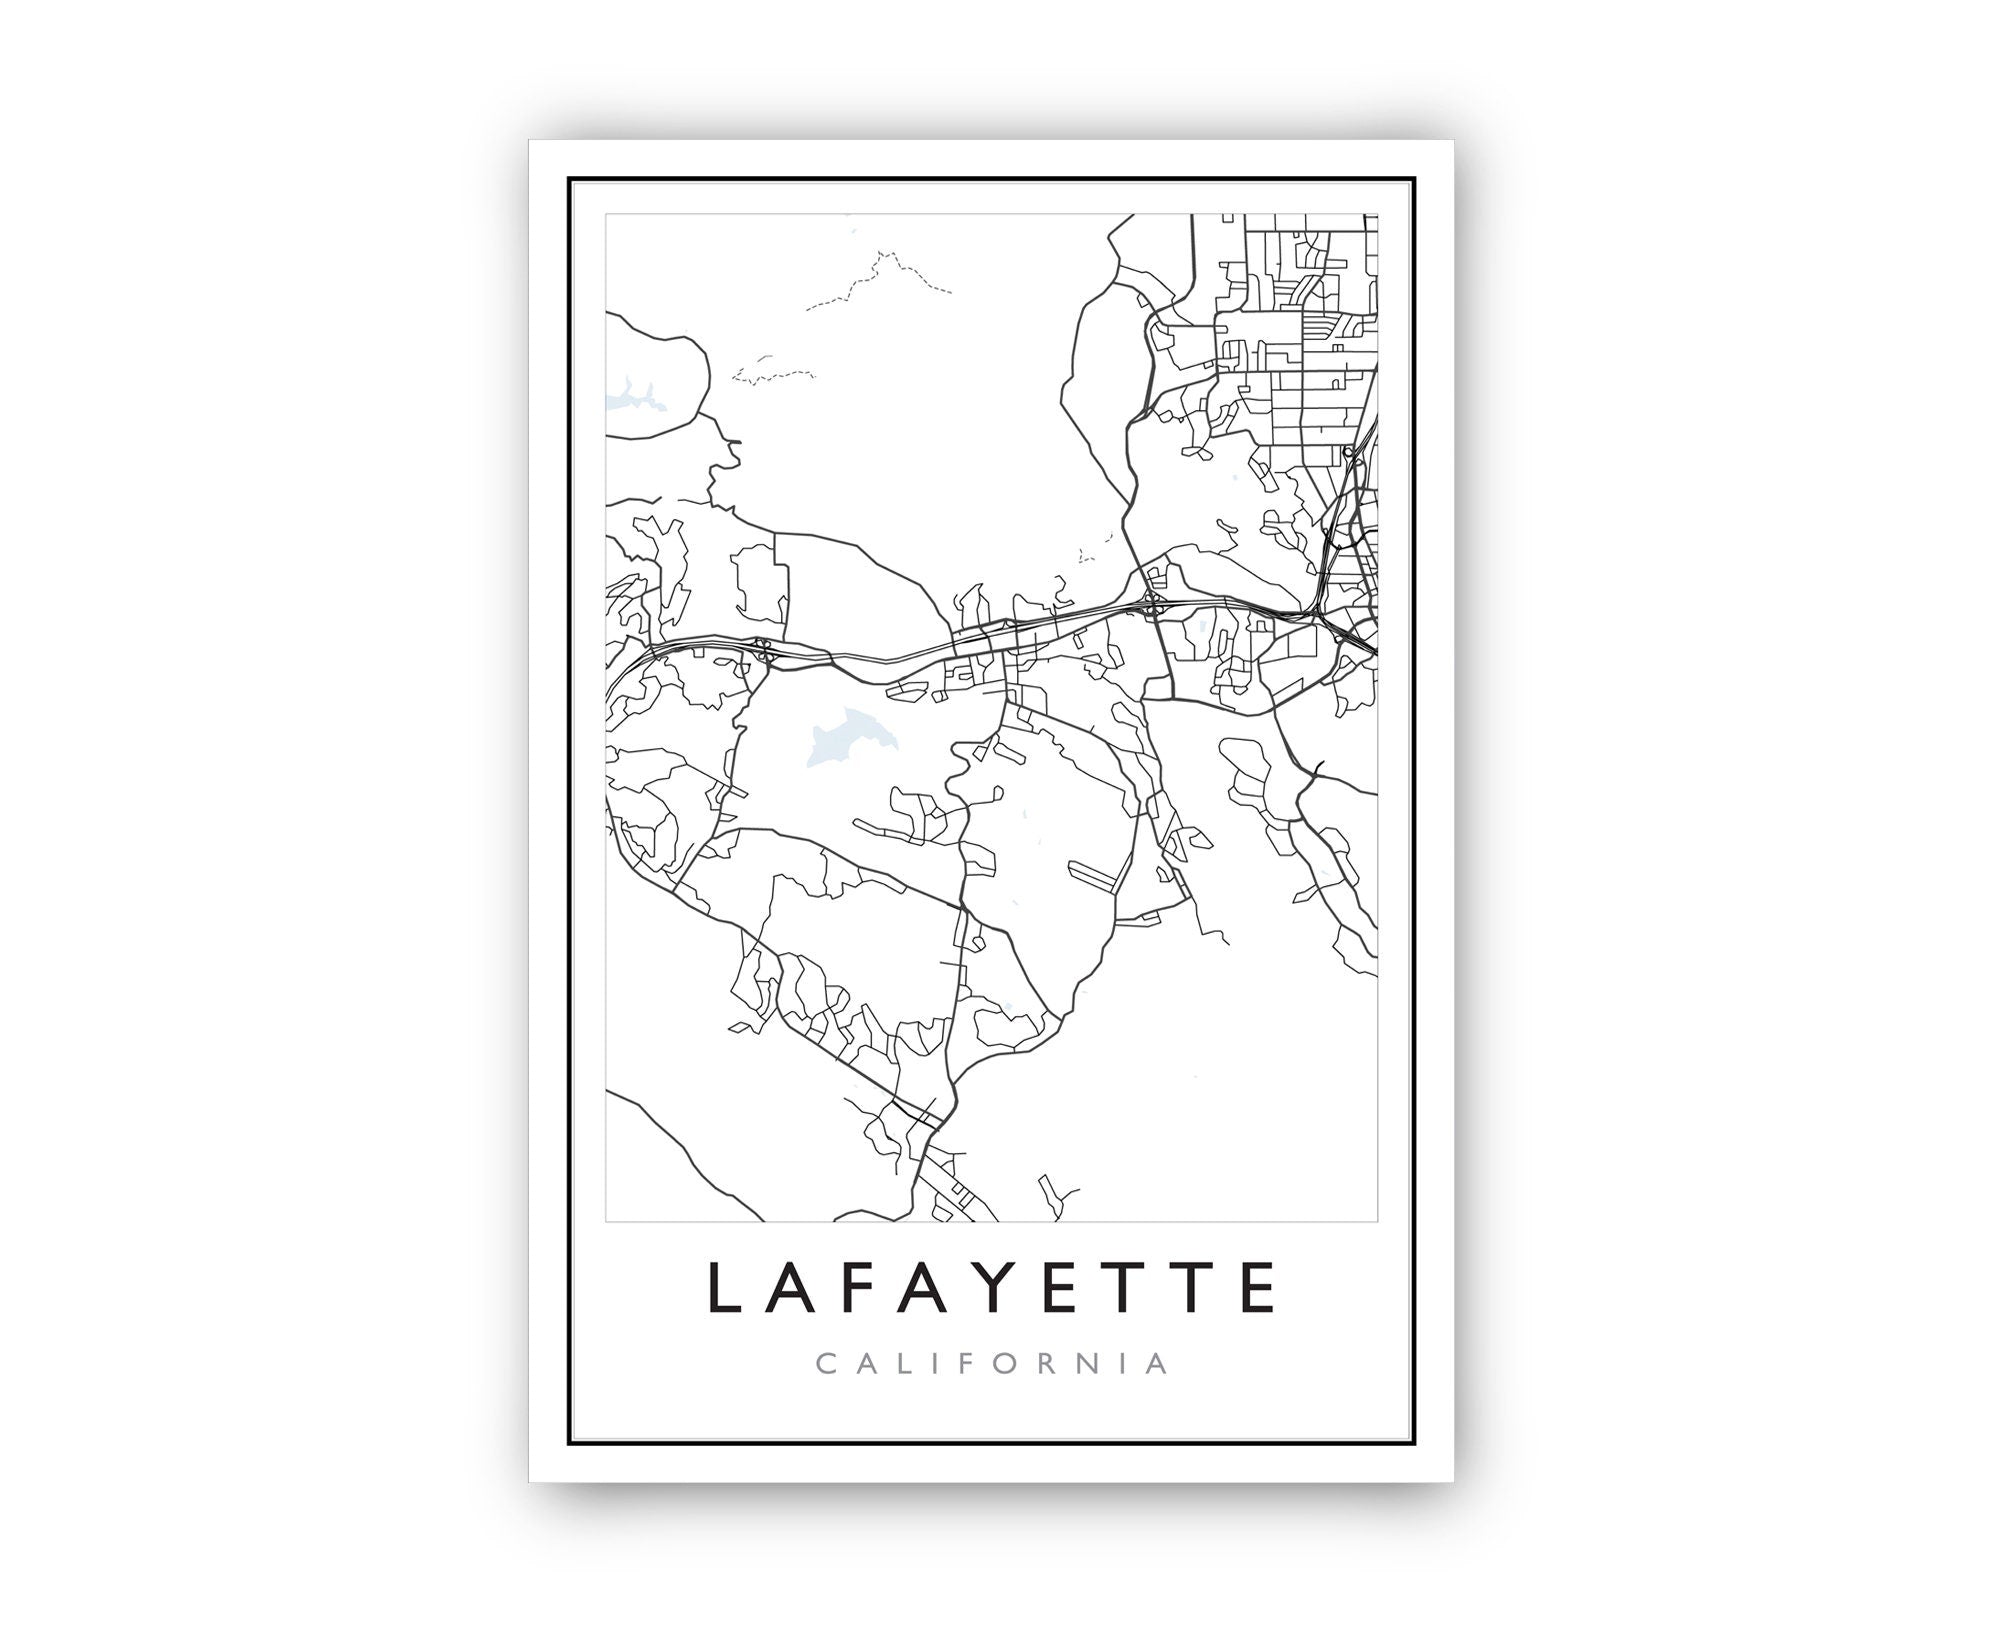 Lafayette California City Map, California Road Map Poster, City Street Map Print, US City Modern City Map, Home Office Wall Decoration